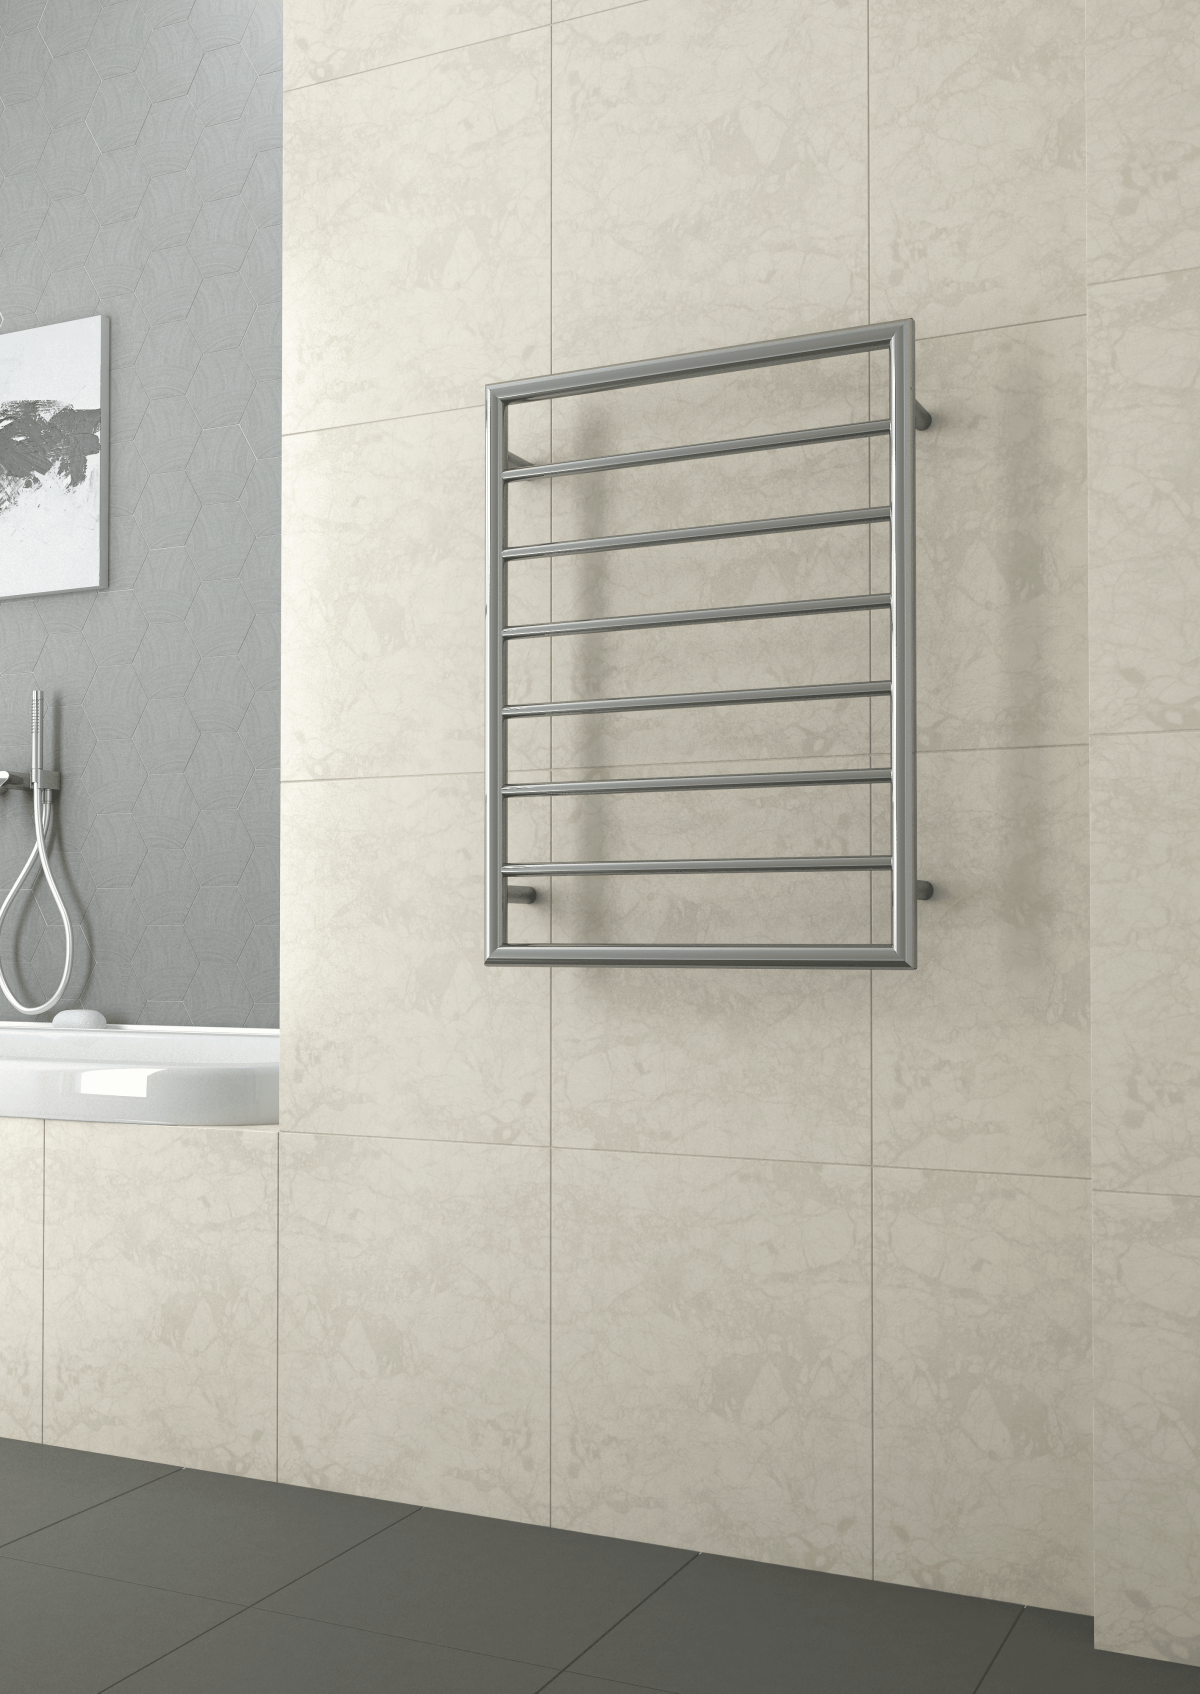 THERMOGROUP SBR44M STRAIGHT ROUND BOX HEATED TOWEL RAIL POLISHED STAINLESS STEEL